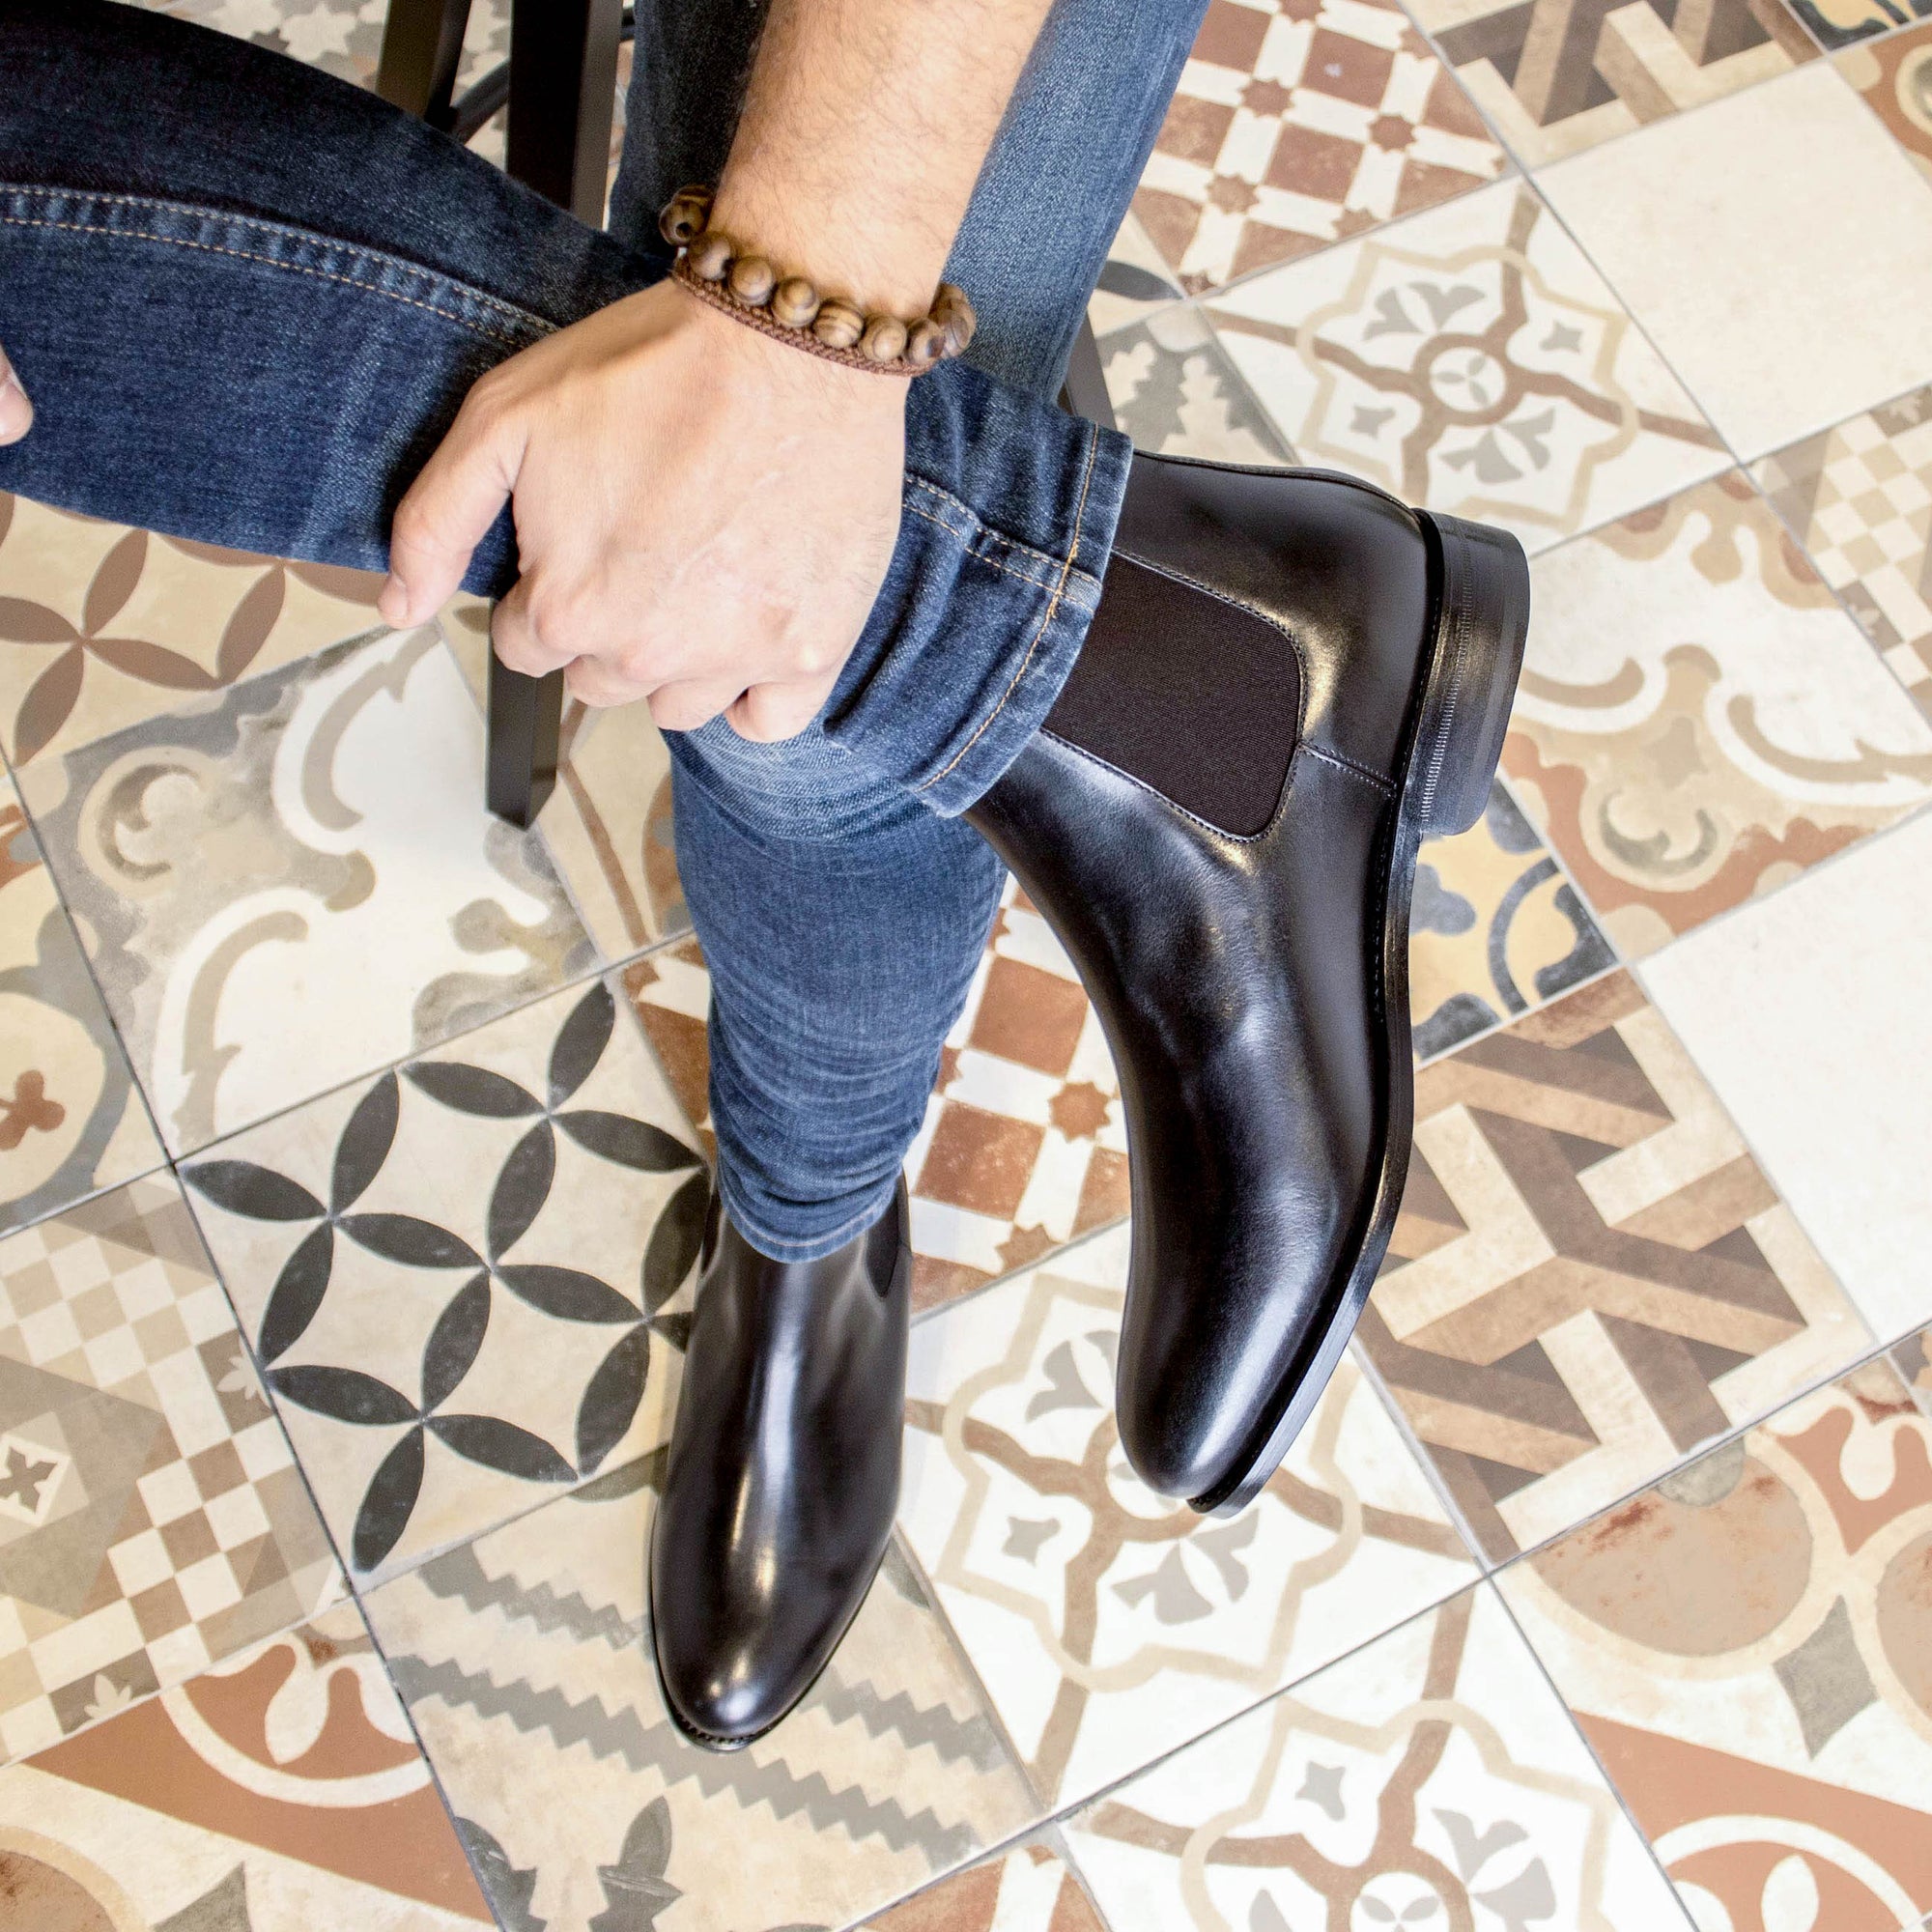 The History of the Chelsea Boot